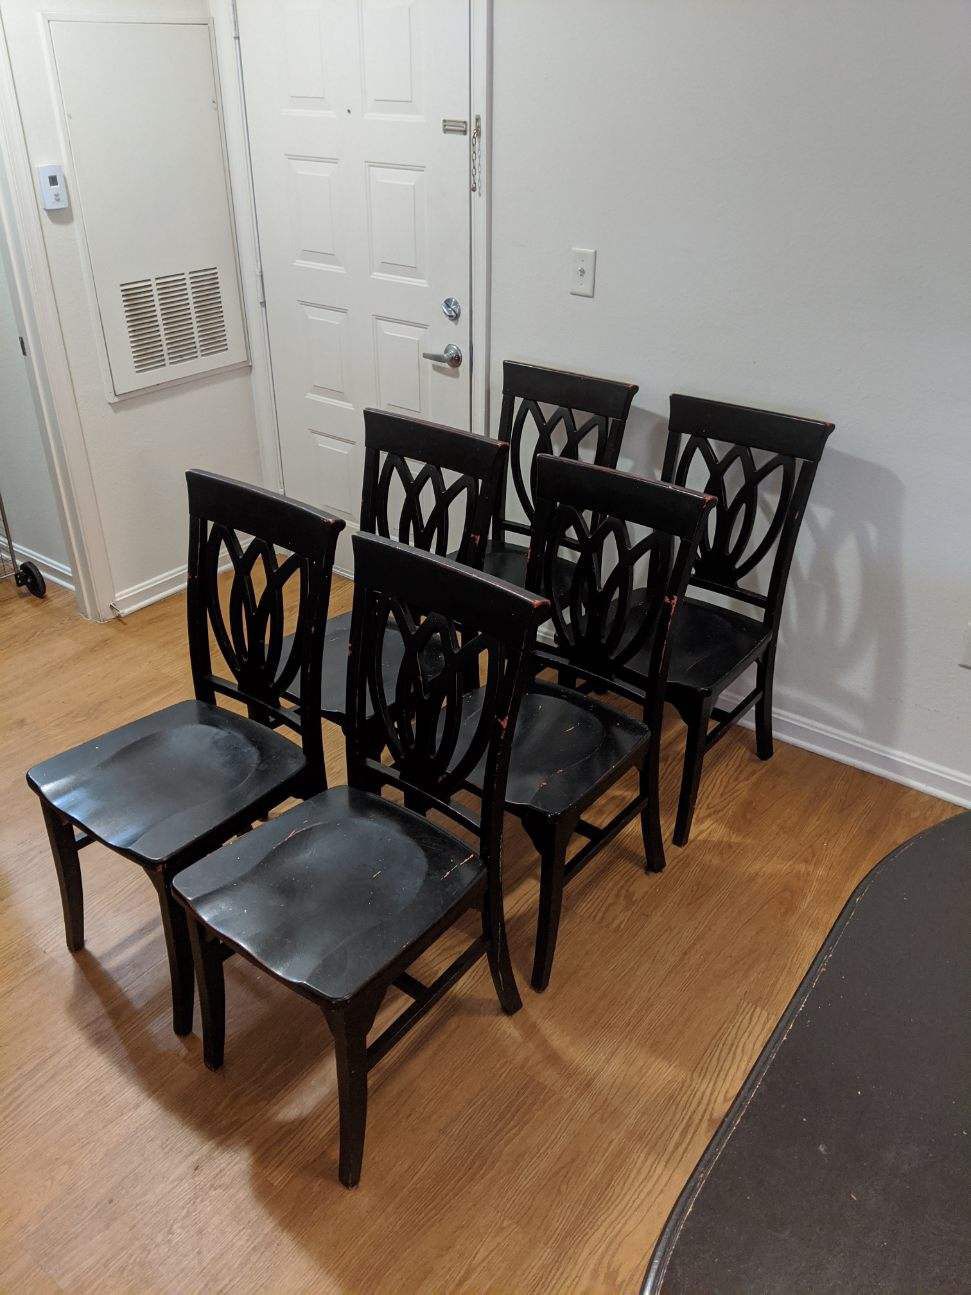 6 SOLID WOOD black chairs